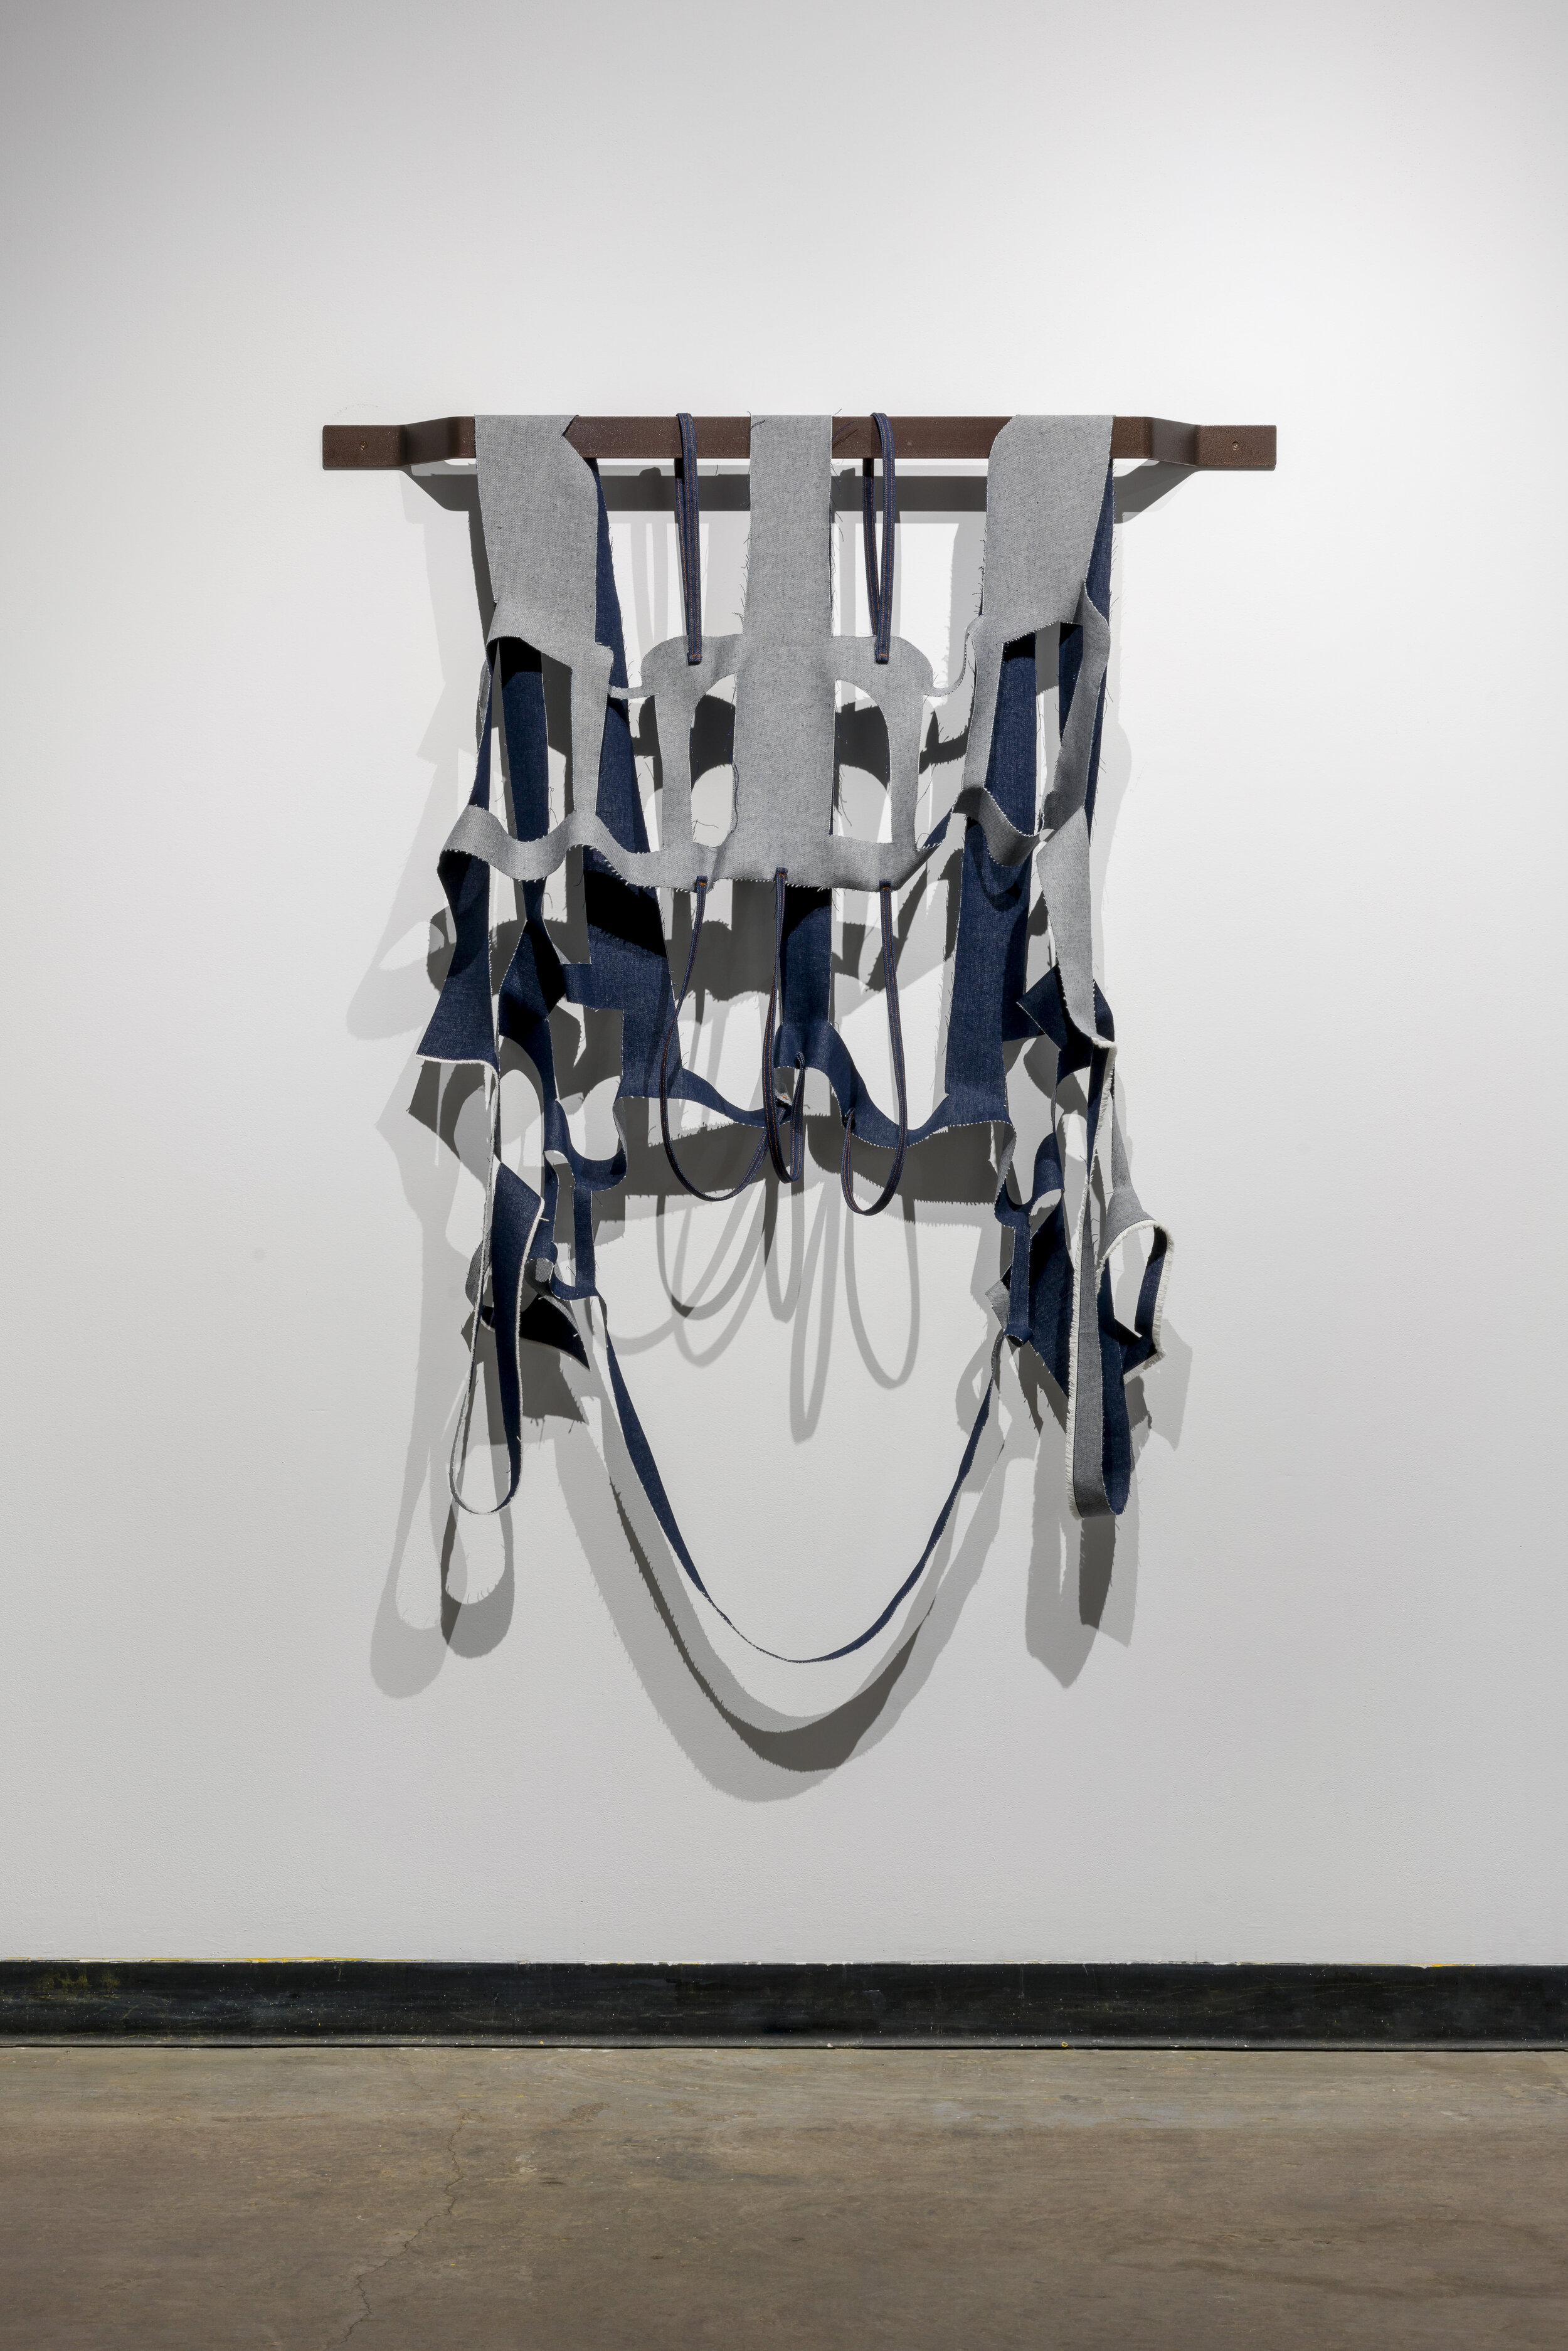  A piece of fabric hangs from a square metal rod attached to the wall behind it. The fabric looks as if a pair of dark blue jeans have been cut apart, making an abstract shape. The top of the hanging fabric has thicker cut pieces, making blocky recta